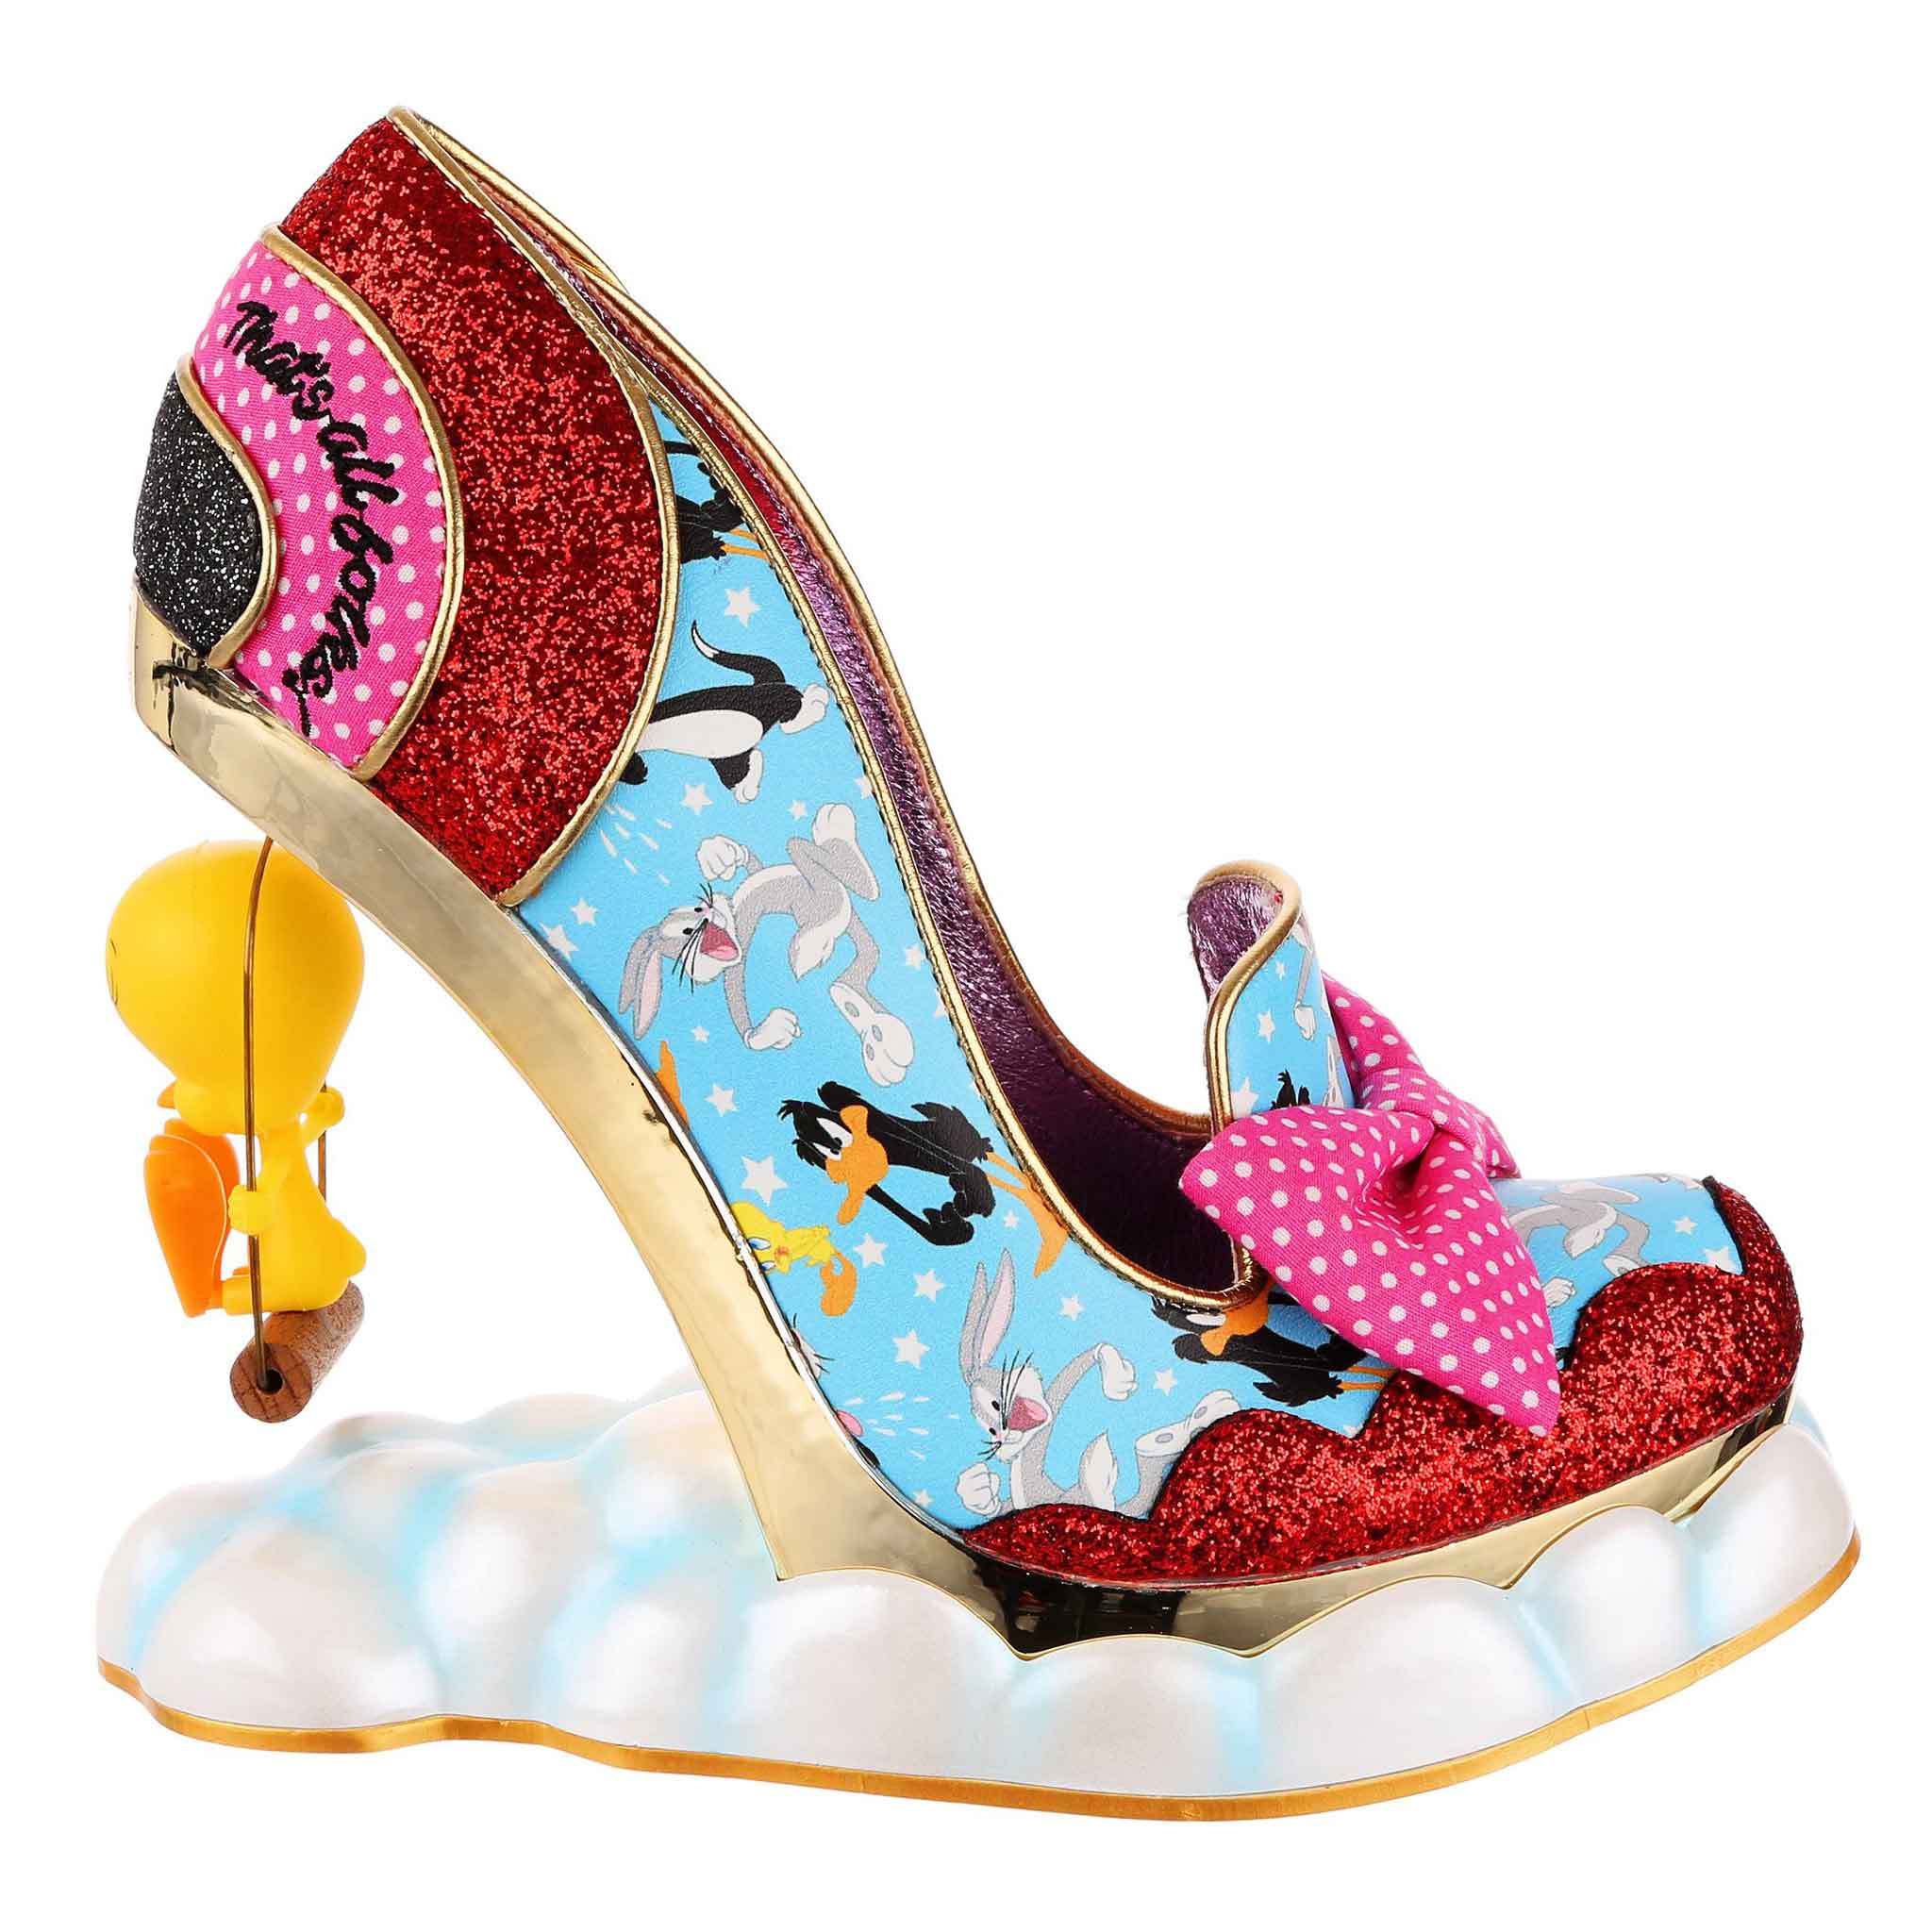 A high heel shoe with blue upper printed with Looney Tunes characters, red glitter toe and heel with a bright pink and white polka dot bow at the front. The concept heel is Tweety Bird sitting on a swing above clouds that are all around the base of the shoe.